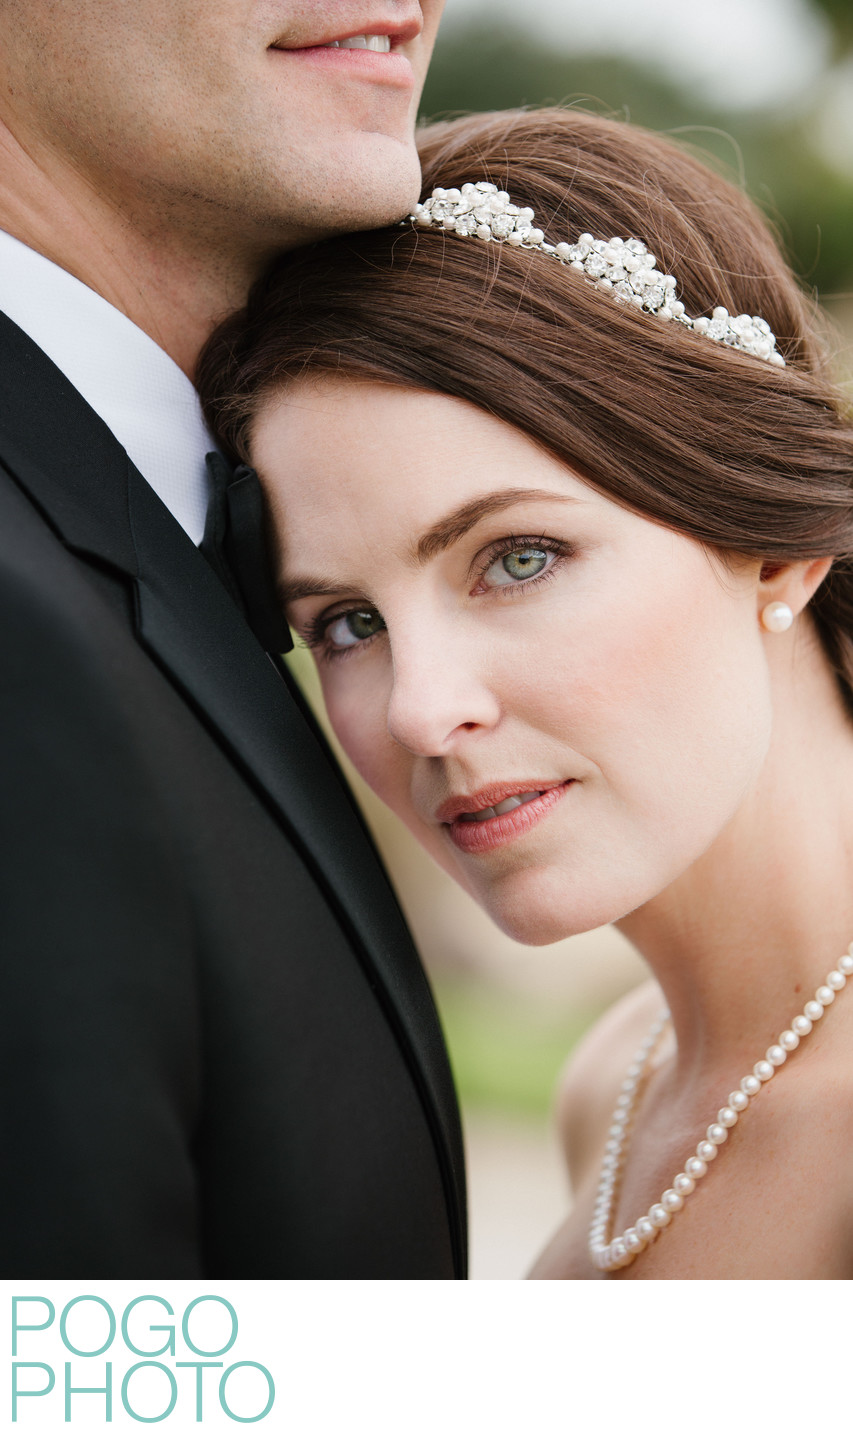 Piercing Gaze From Elegant Bride with Jeweled Hairpiece